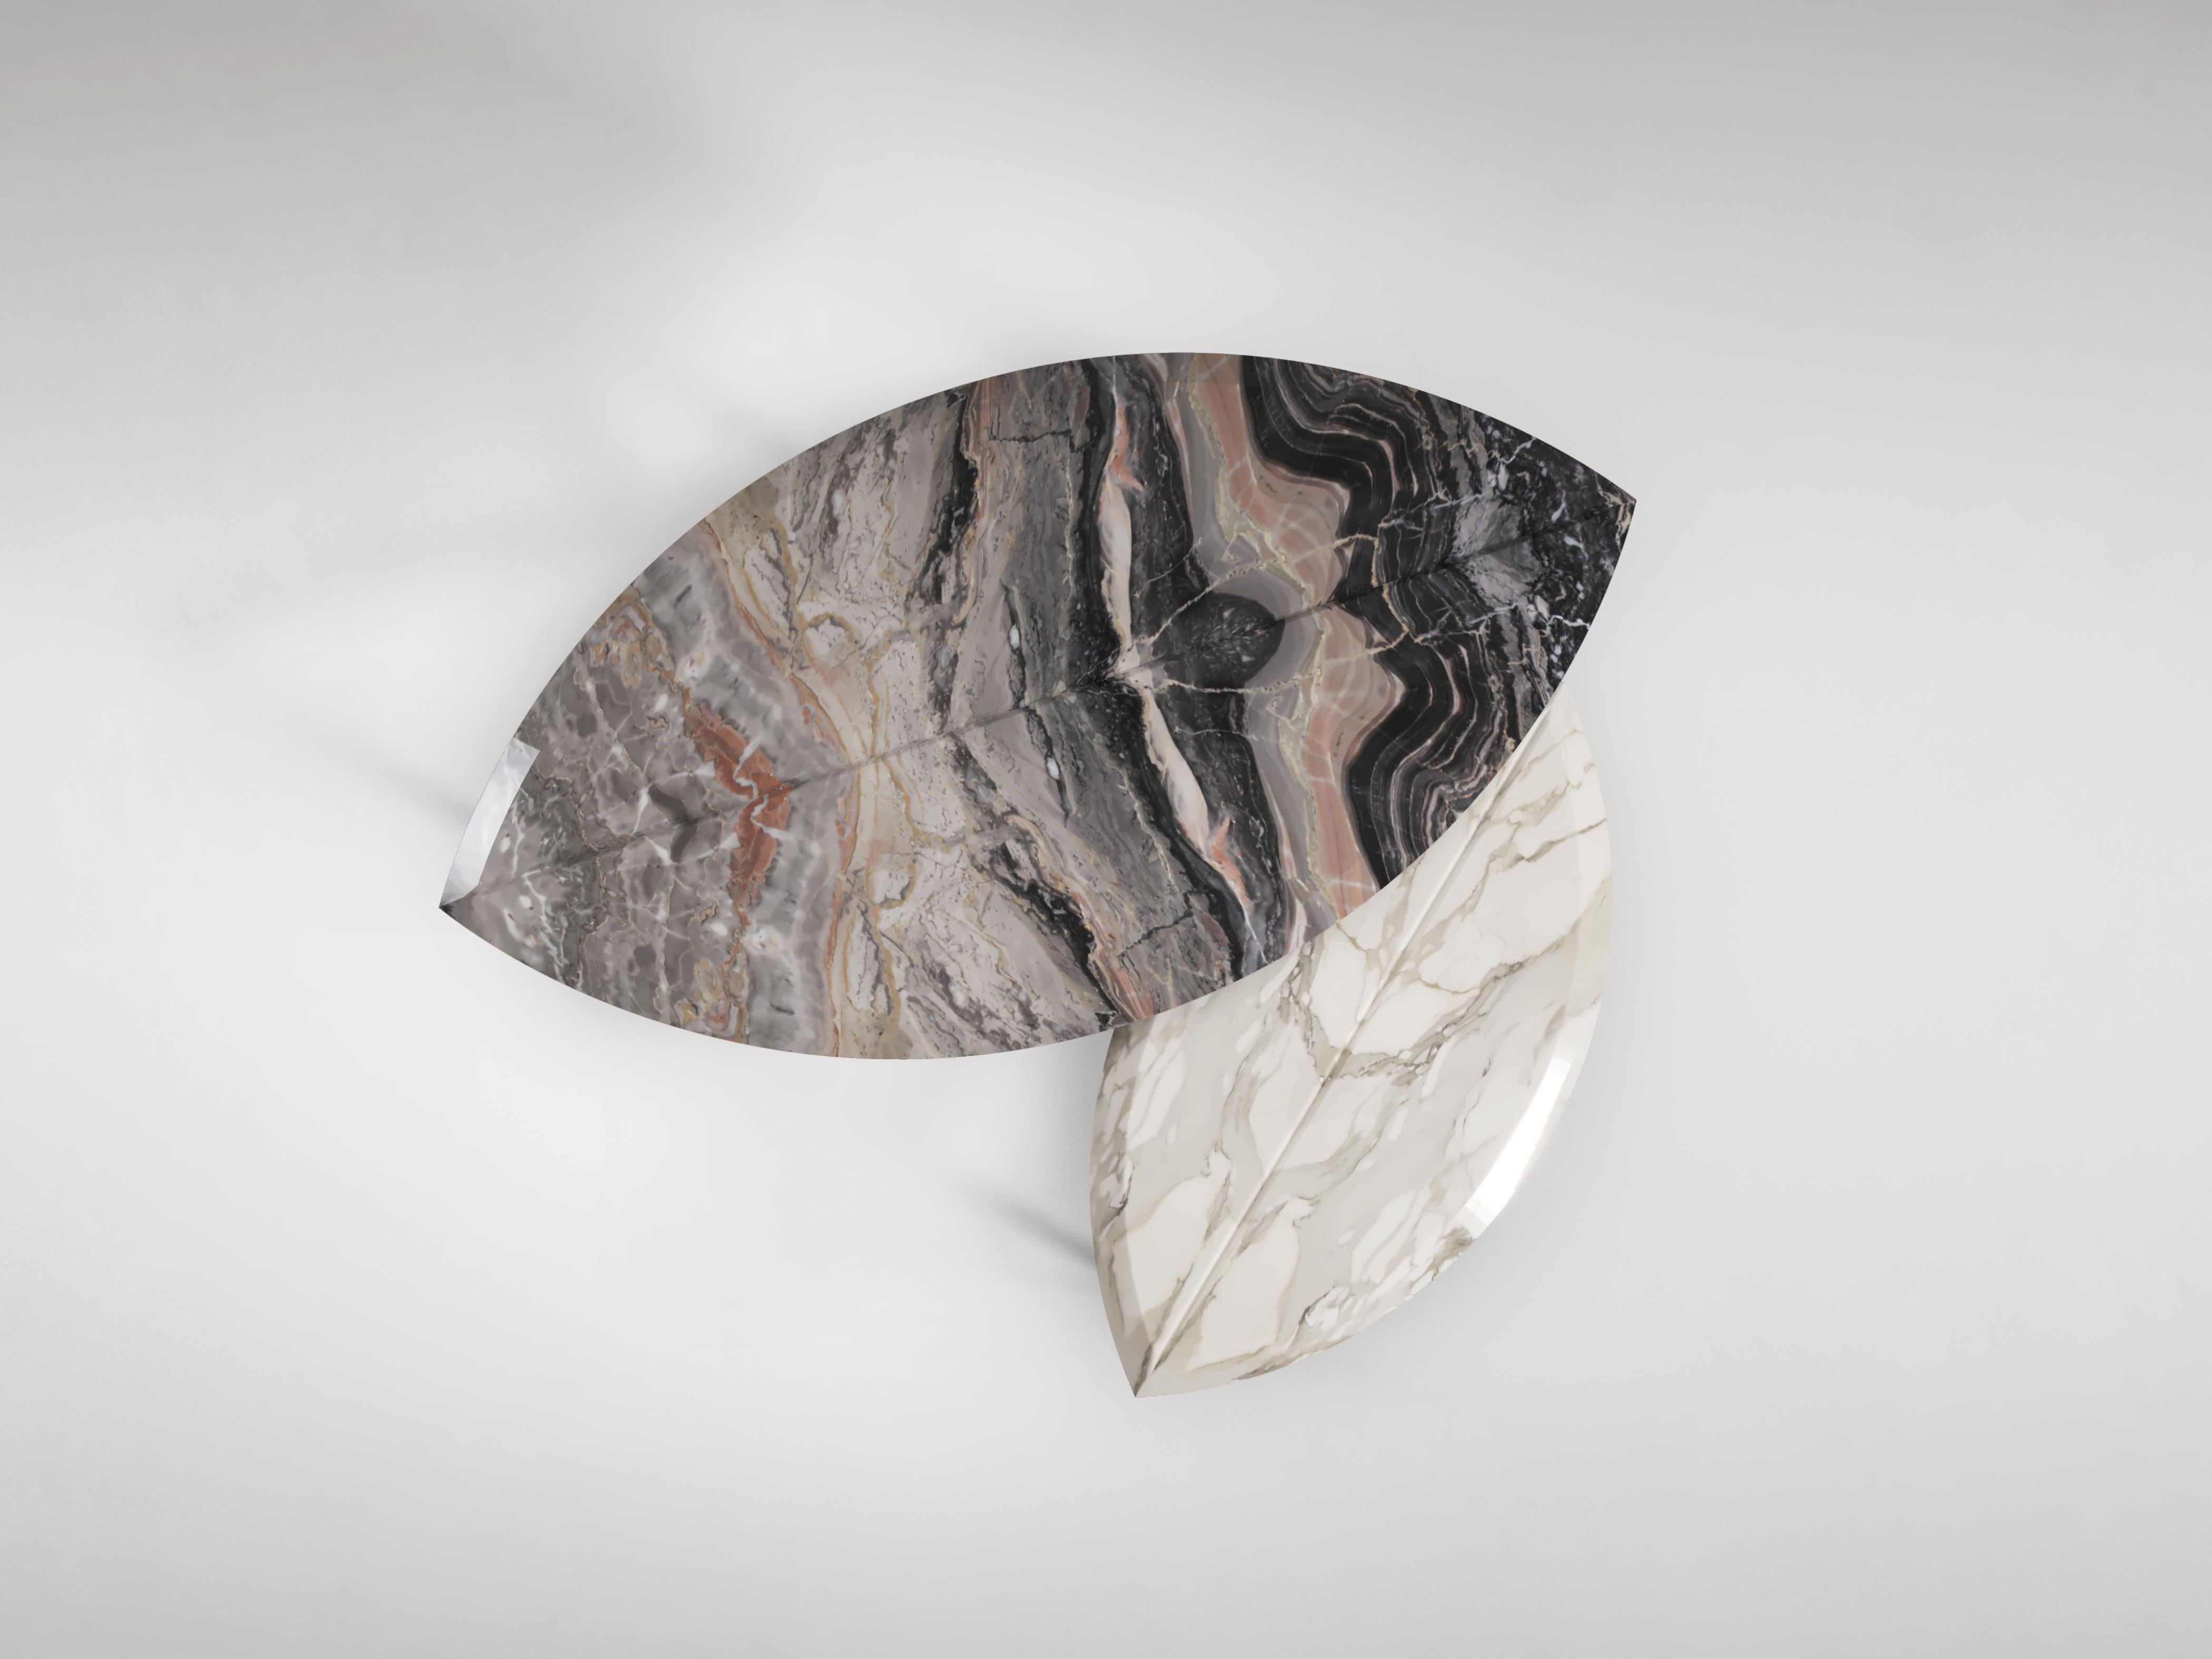 Two sizes of coffee table in the shape of two giant leaves. The veins of the book-matched marble mirror the veins of a leaf. Available in various marbles and natural stones as well as different metal finishes.

Dimension:
Book 1: 105cm x 55cm40cm